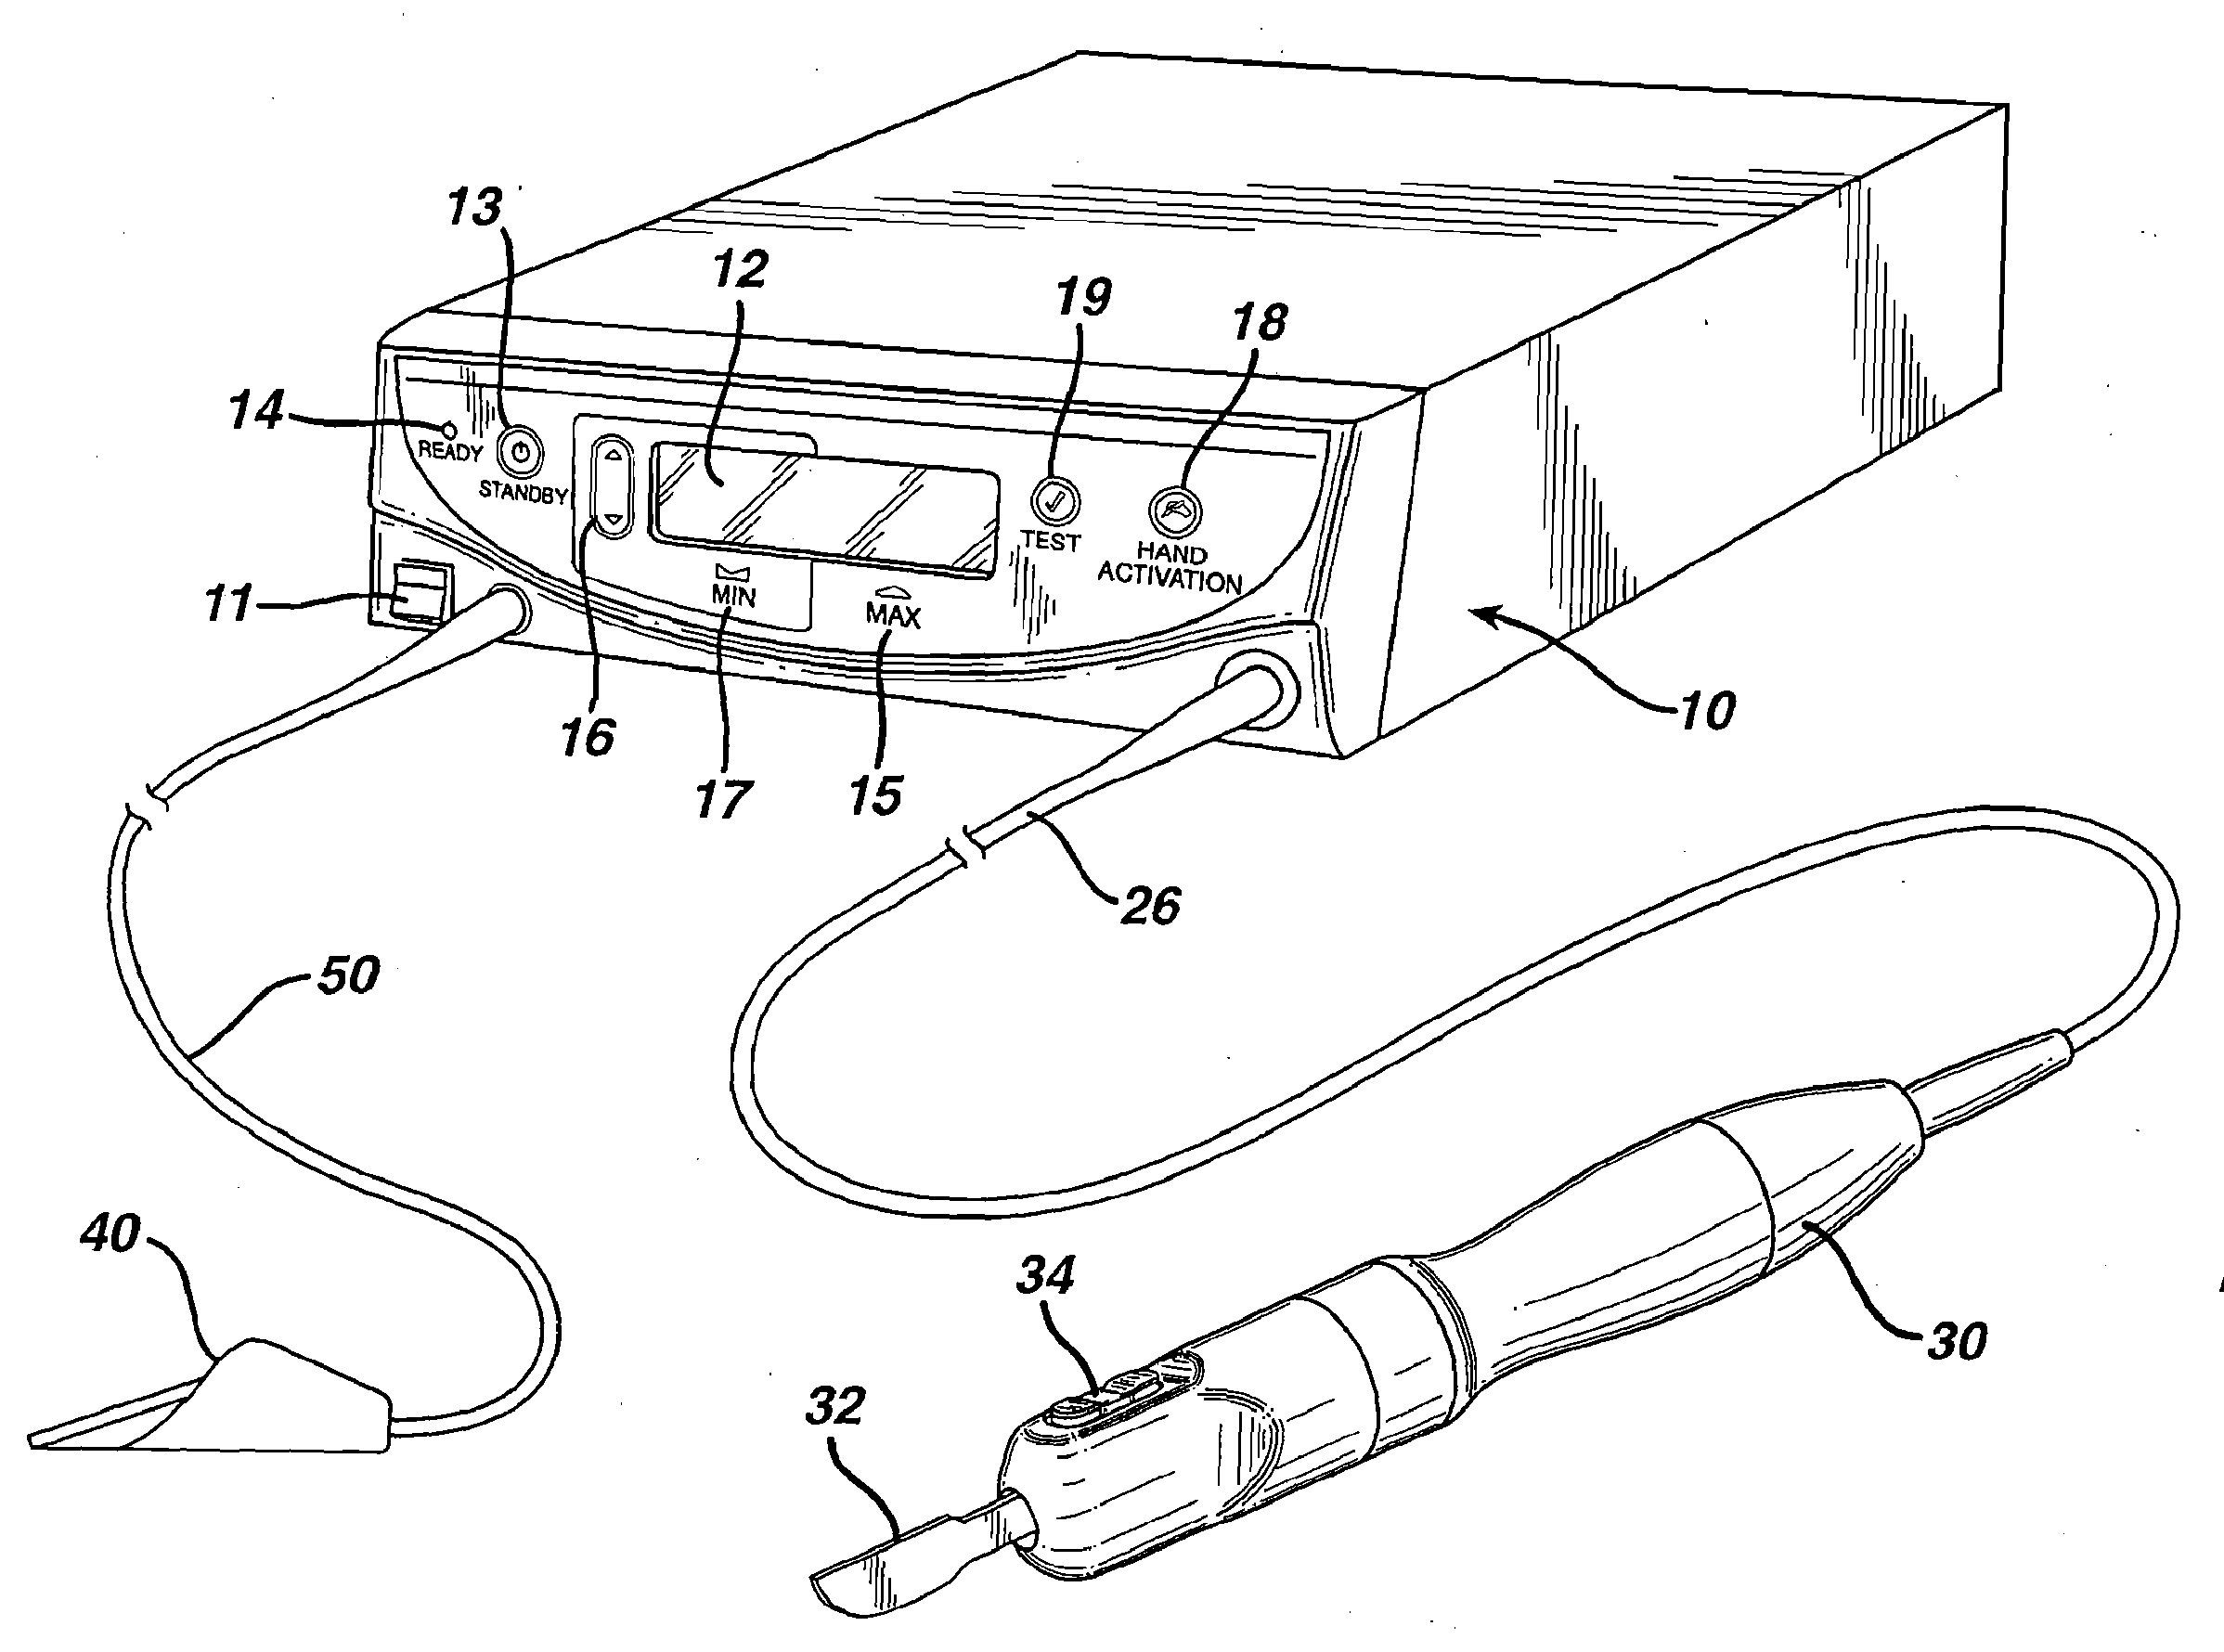 Apparatus and method for alerting generator functions in an ultrasonic surgical system